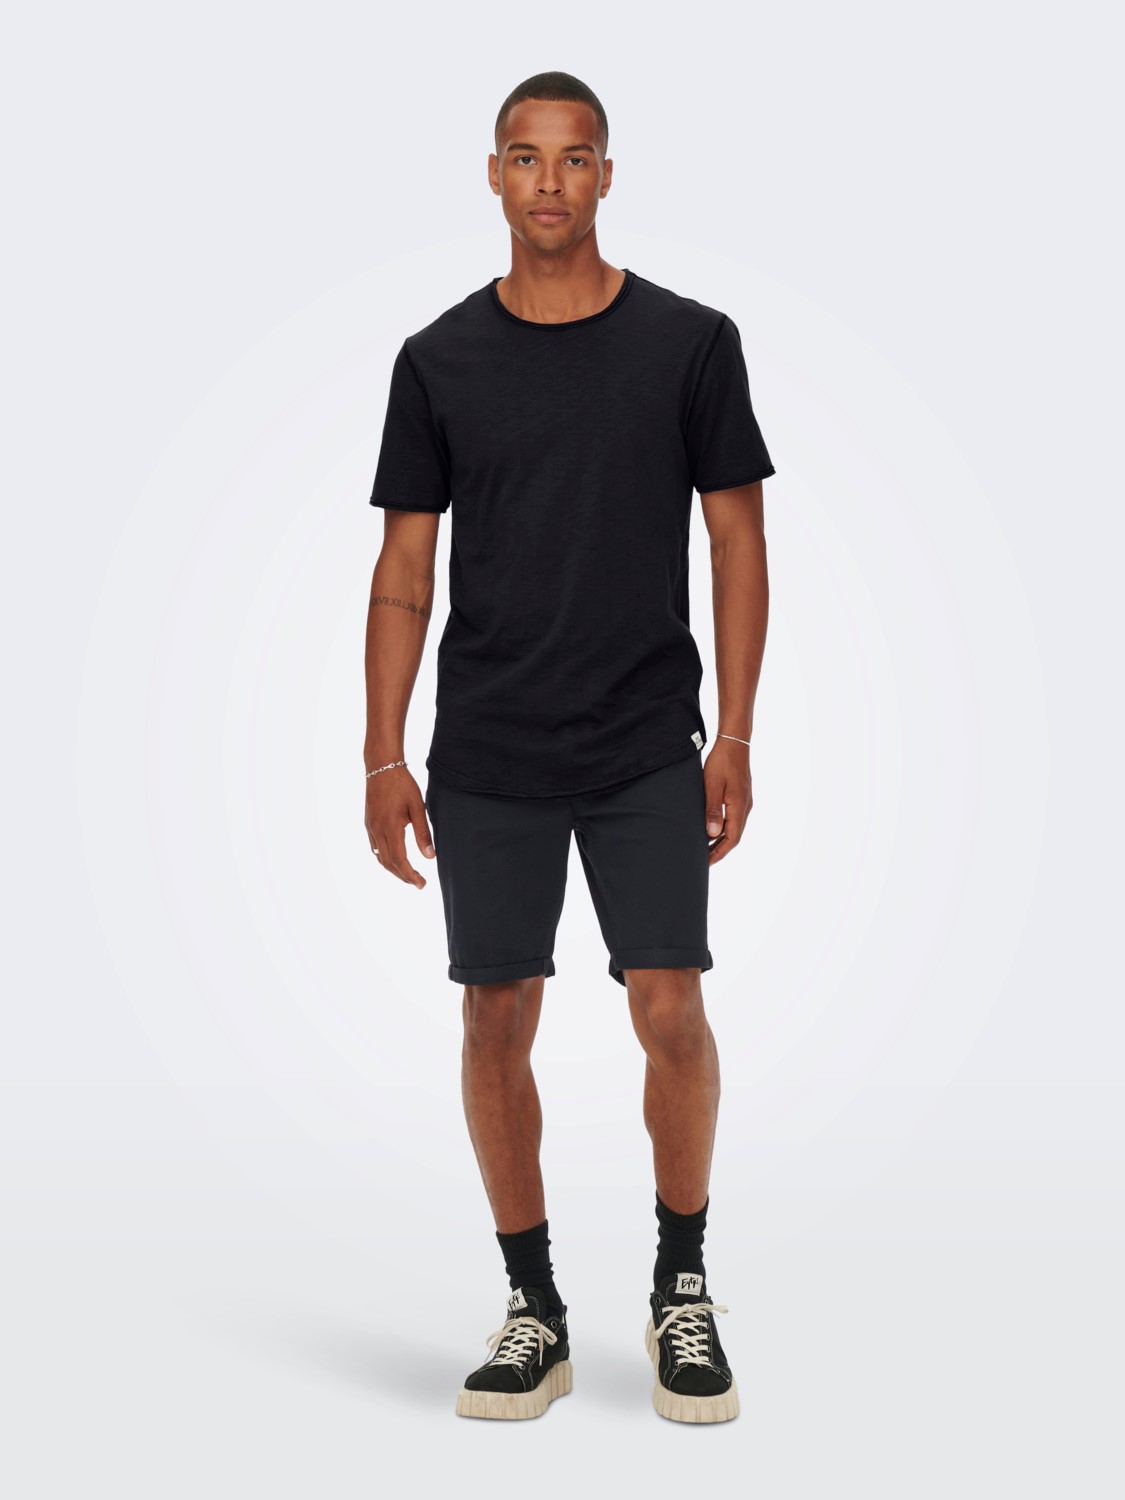 Benne Long Line Fit T-Shirt S/S - Black Small